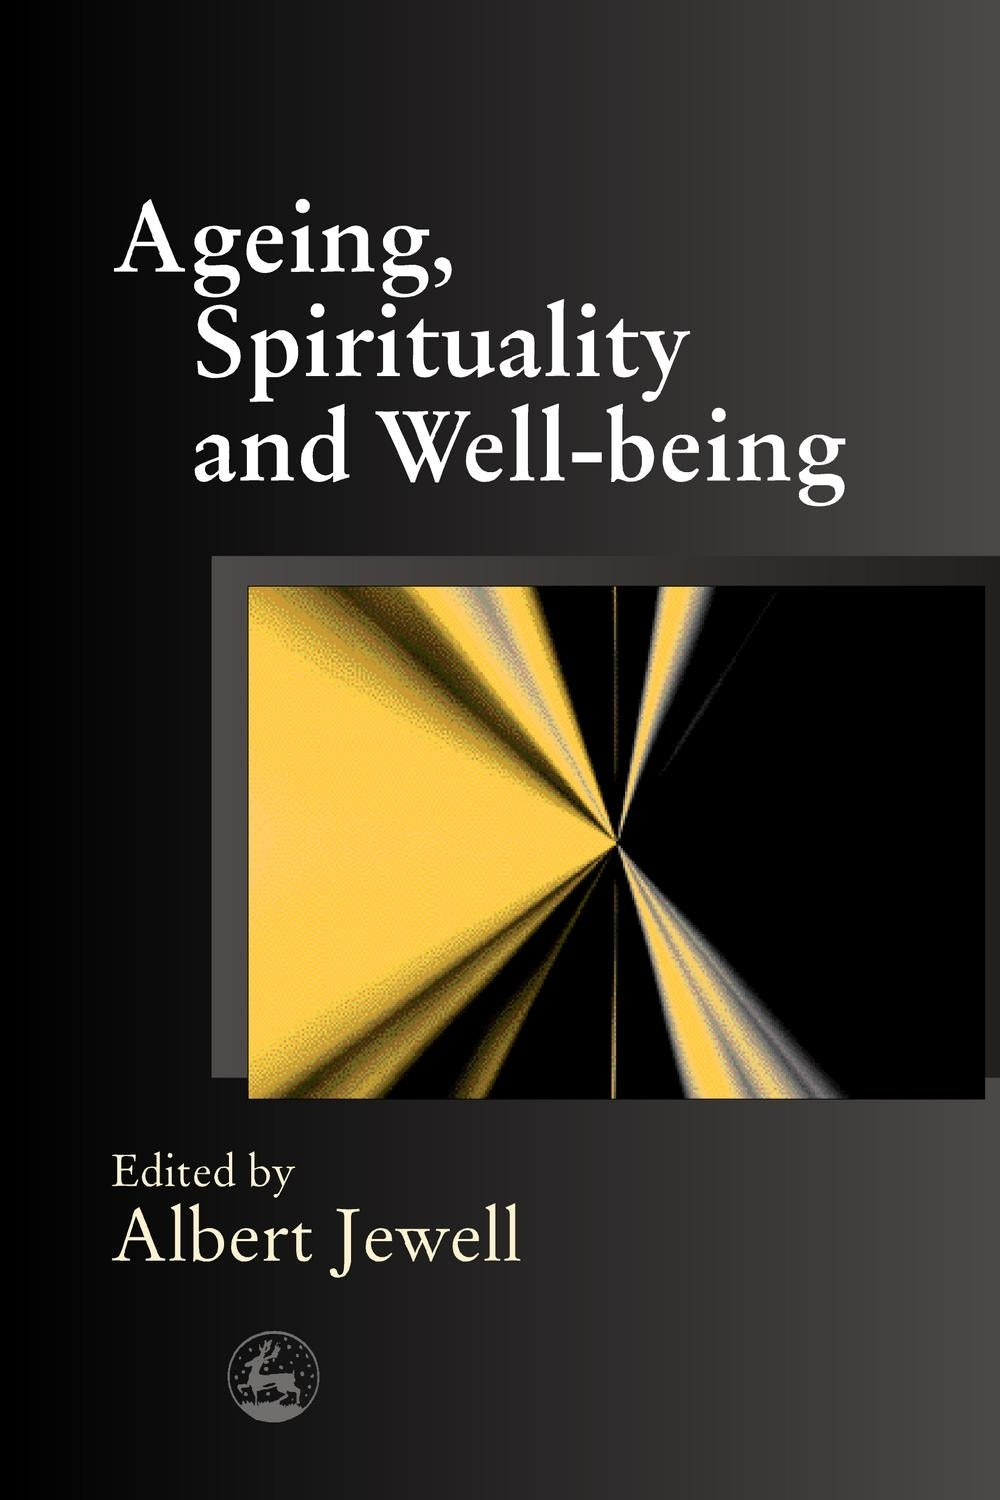 Ageing, Spirituality and Well-being by Albert Jewell